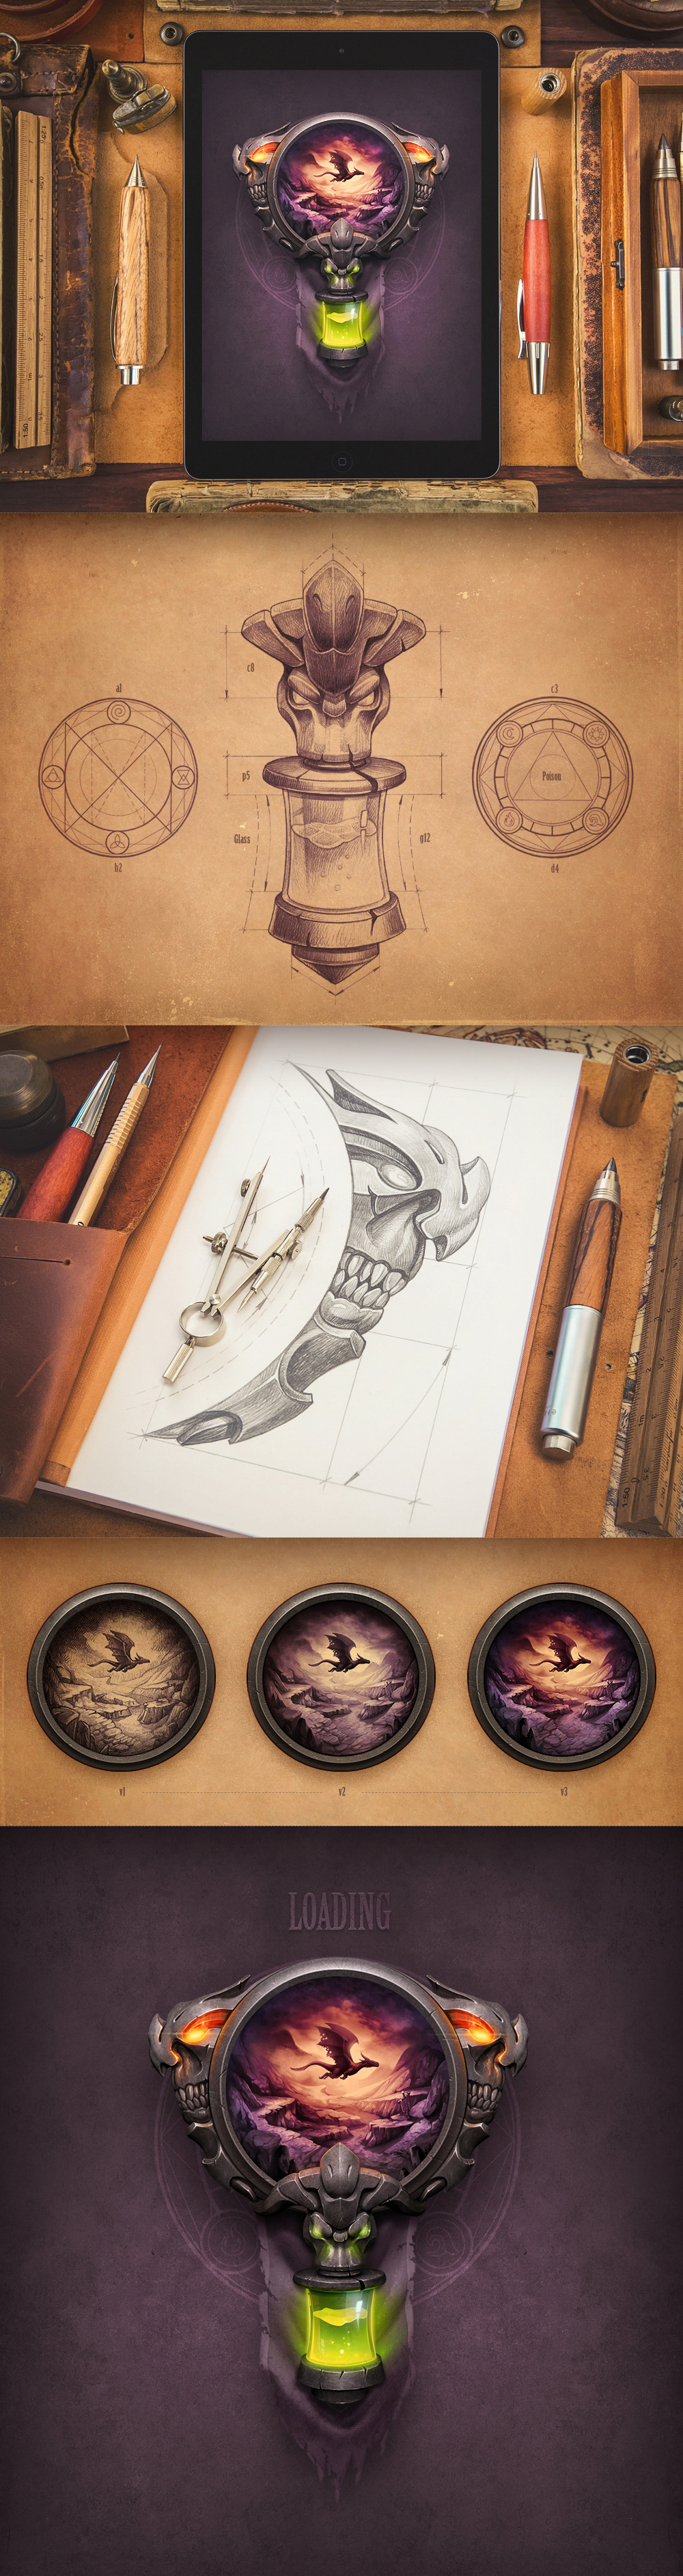 ios game iphone sketch Character design UI Interface STEAMPUNK arcade plane stone